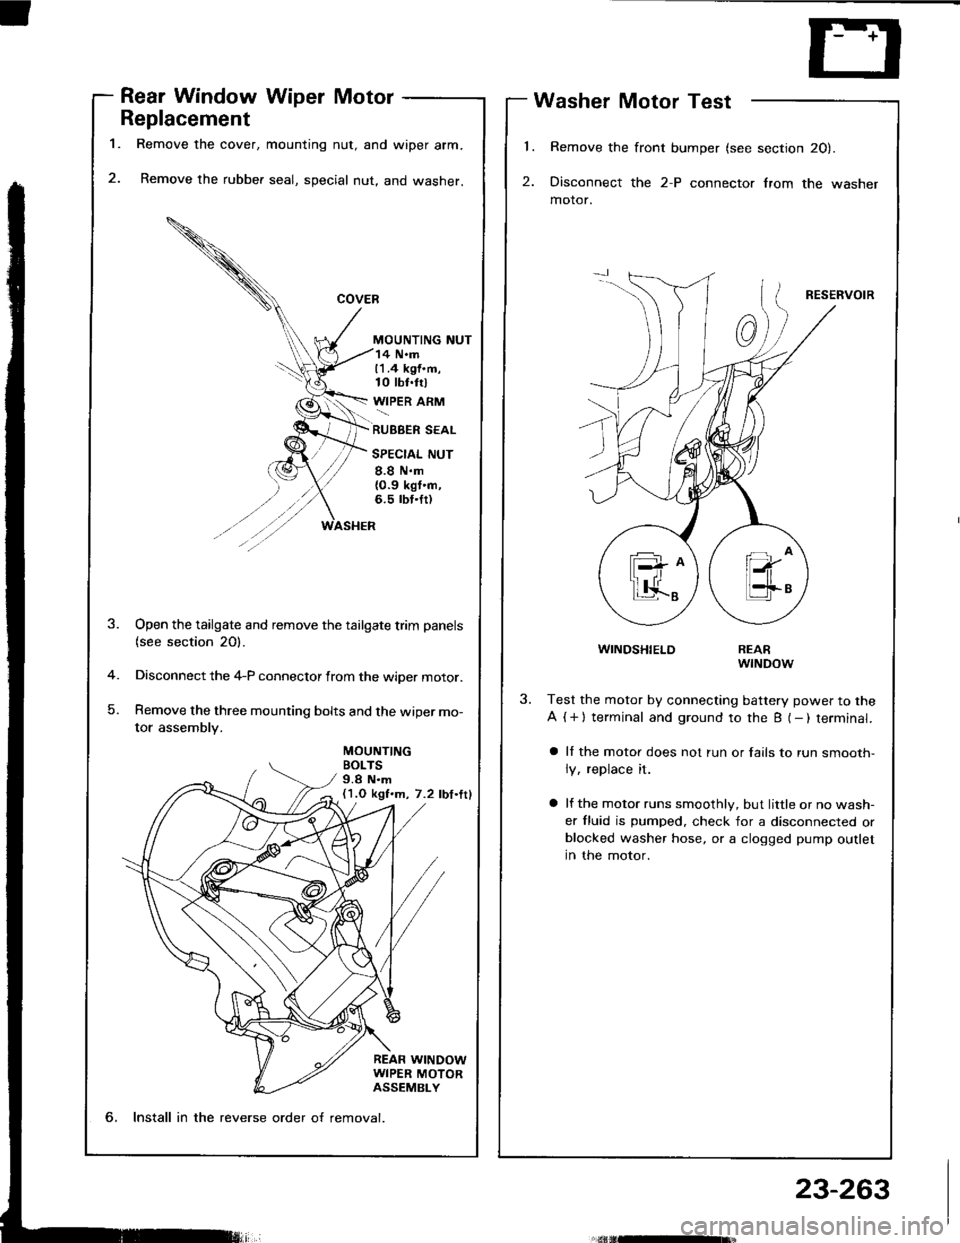 HONDA INTEGRA 1994 4.G User Guide l.
2.
1.
Rear Window Wiper Motor
Replacement
Remove the cover, mounting nut, and wiper arm.
Remove the rubber seal, special nut, and washer.
MOUNTING NUT
Washer Motor Test
Remove the front bumper (see